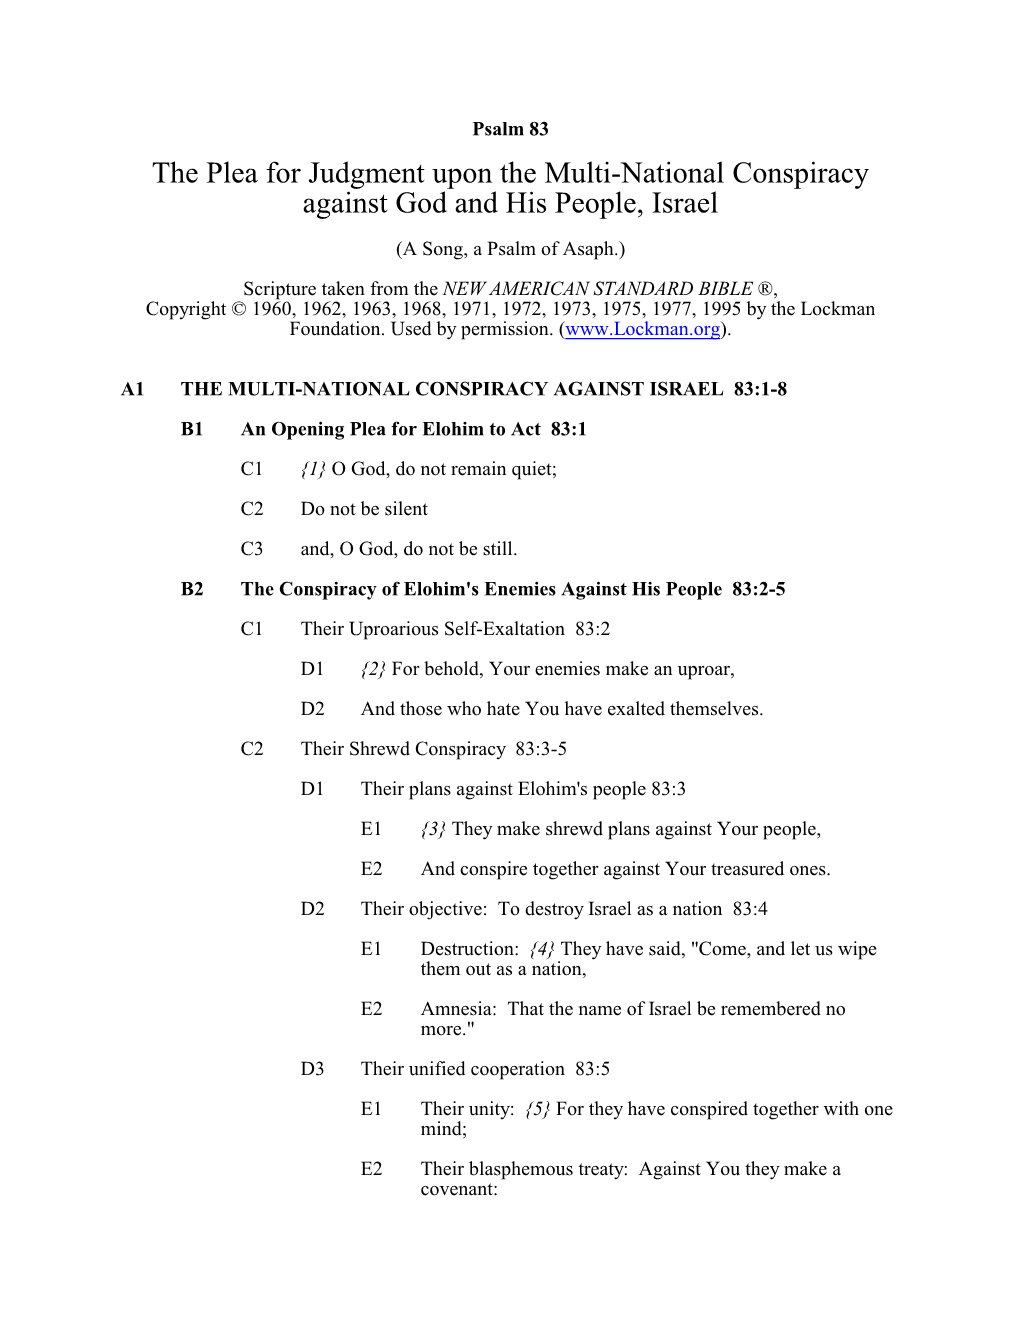 Psalm 83 Annotated Outline